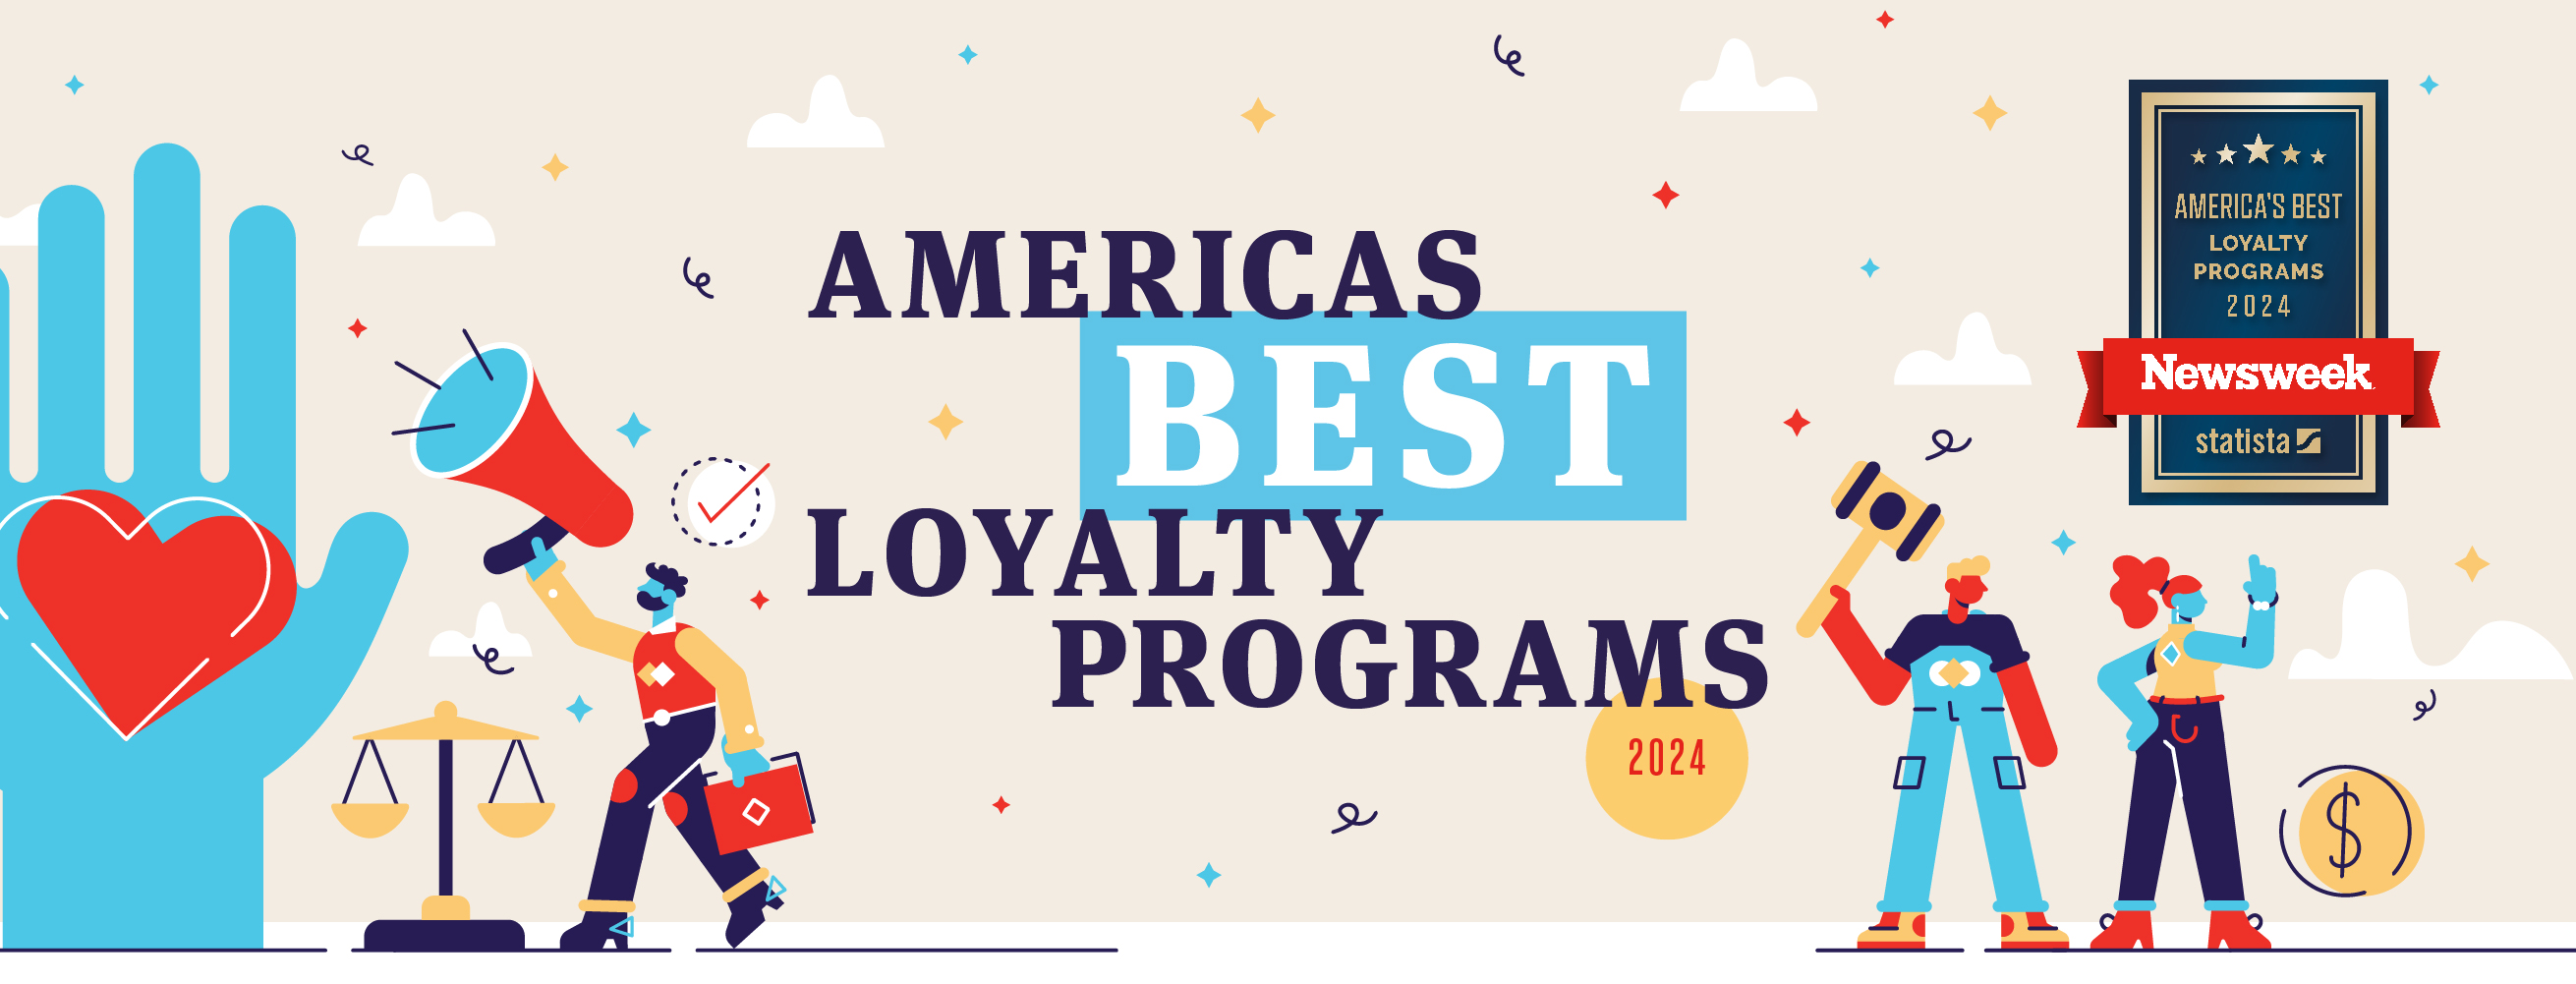 New report: 62 loyalty program benefits ranked in a Special